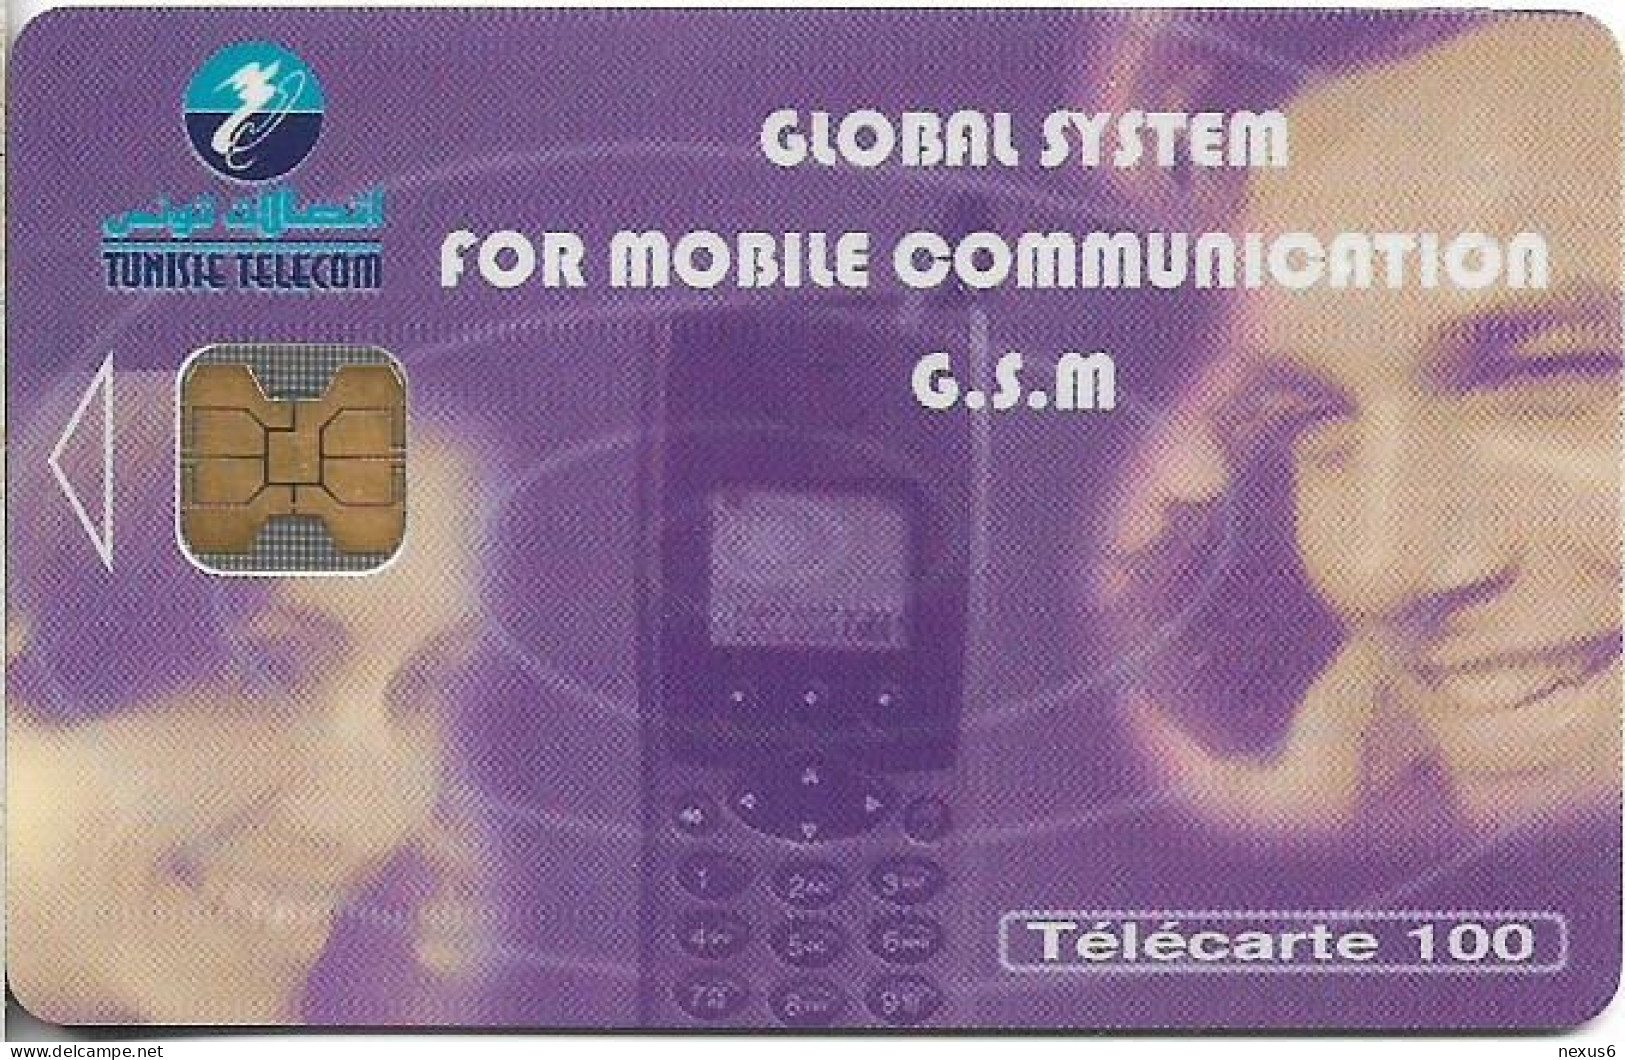 Tunisia - Tunisie Telecom - Global System For Mobile Comm., 100Units, Chip Oberthur, 01.2000, 30.000ex, Used - Tunisie